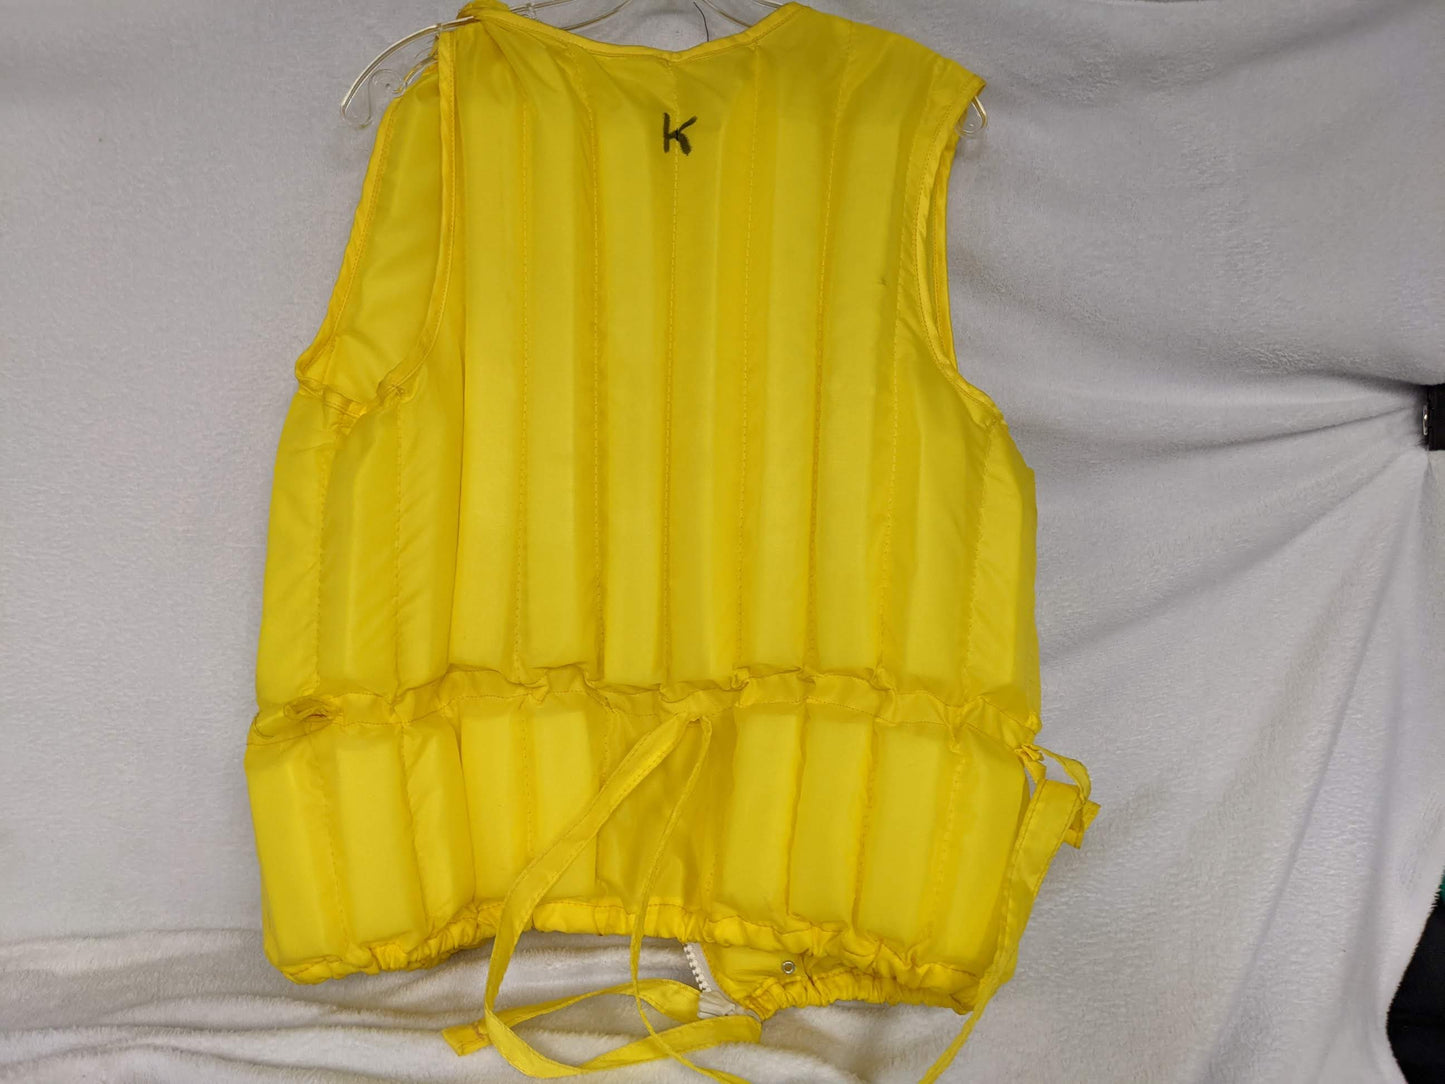 LL Bean Delta Model 507 Type III PFD Boating Vest Size Adult Medium 34-36 In Chest  Yellow  Used